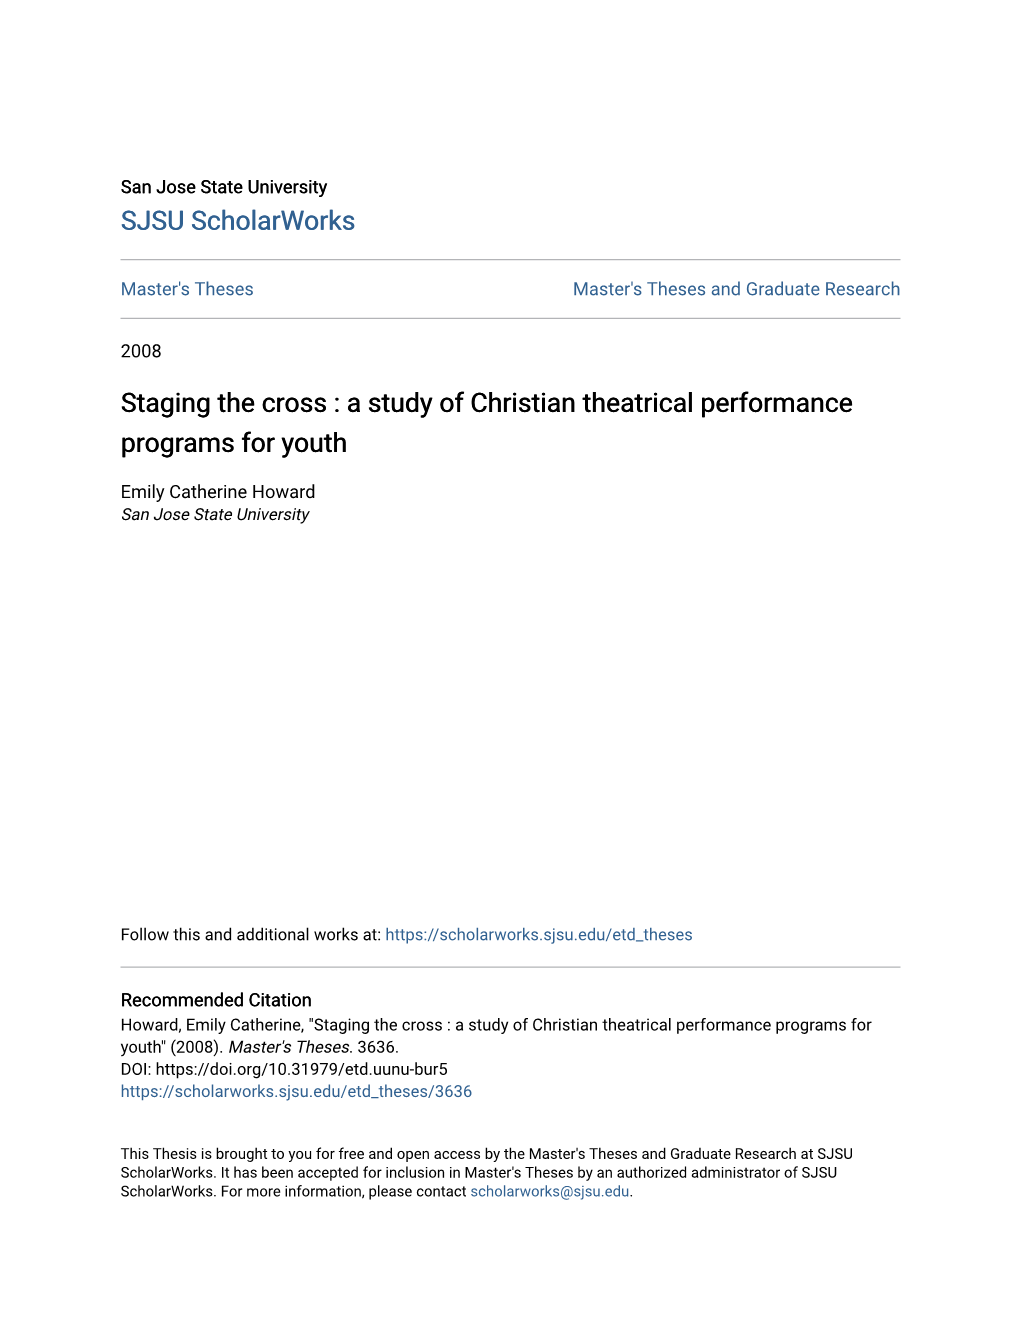 A Study of Christian Theatrical Performance Programs for Youth